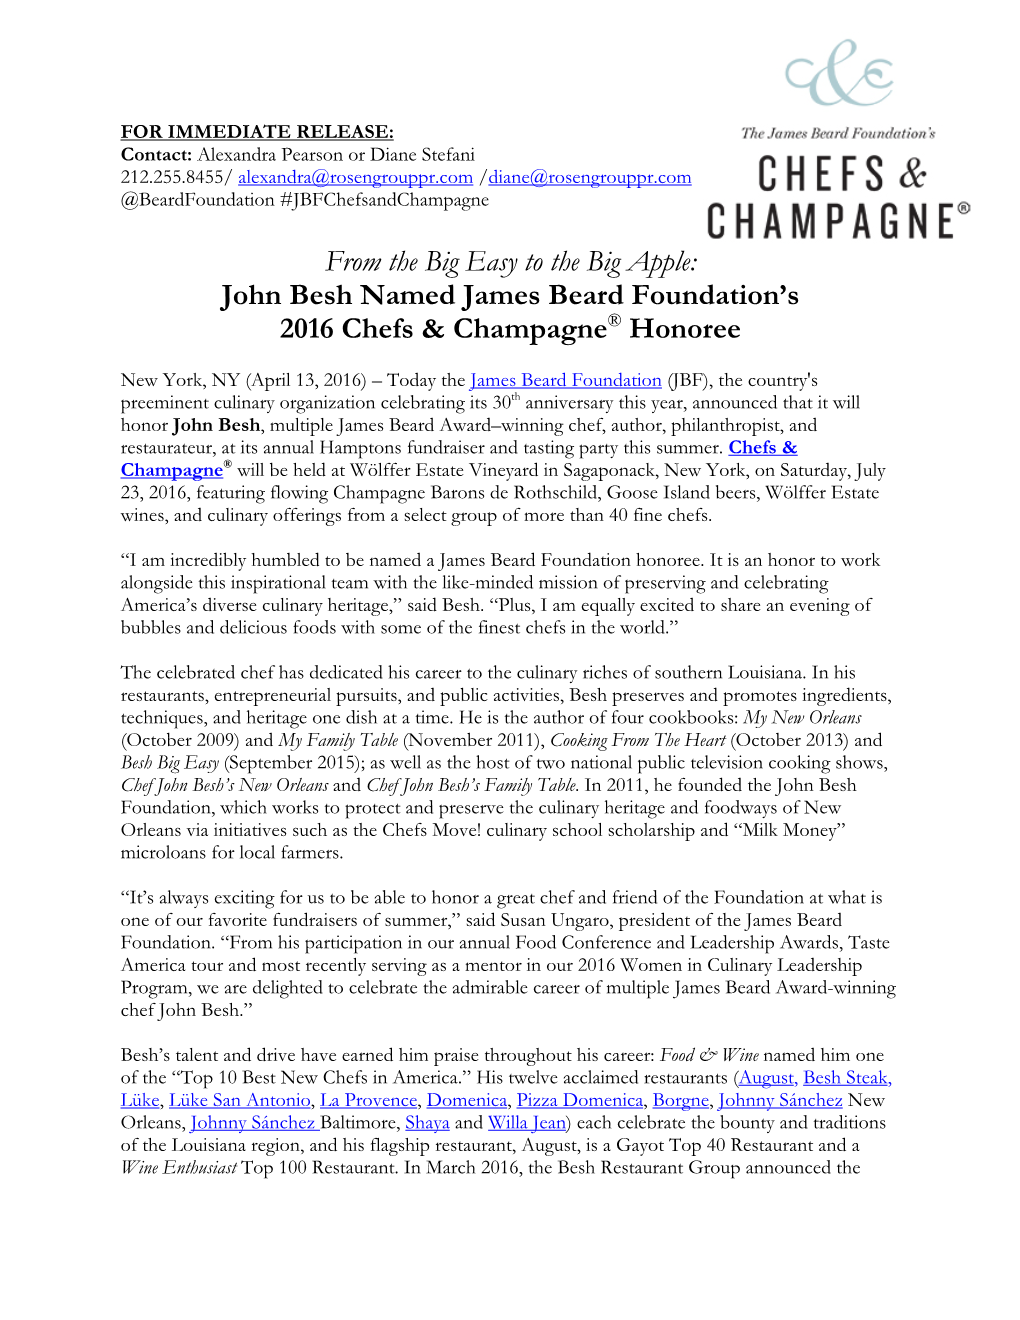 From the Big Easy to the Big Apple: John Besh Named James Beard Foundation’S 2016 Chefs & Champagne® Honoree